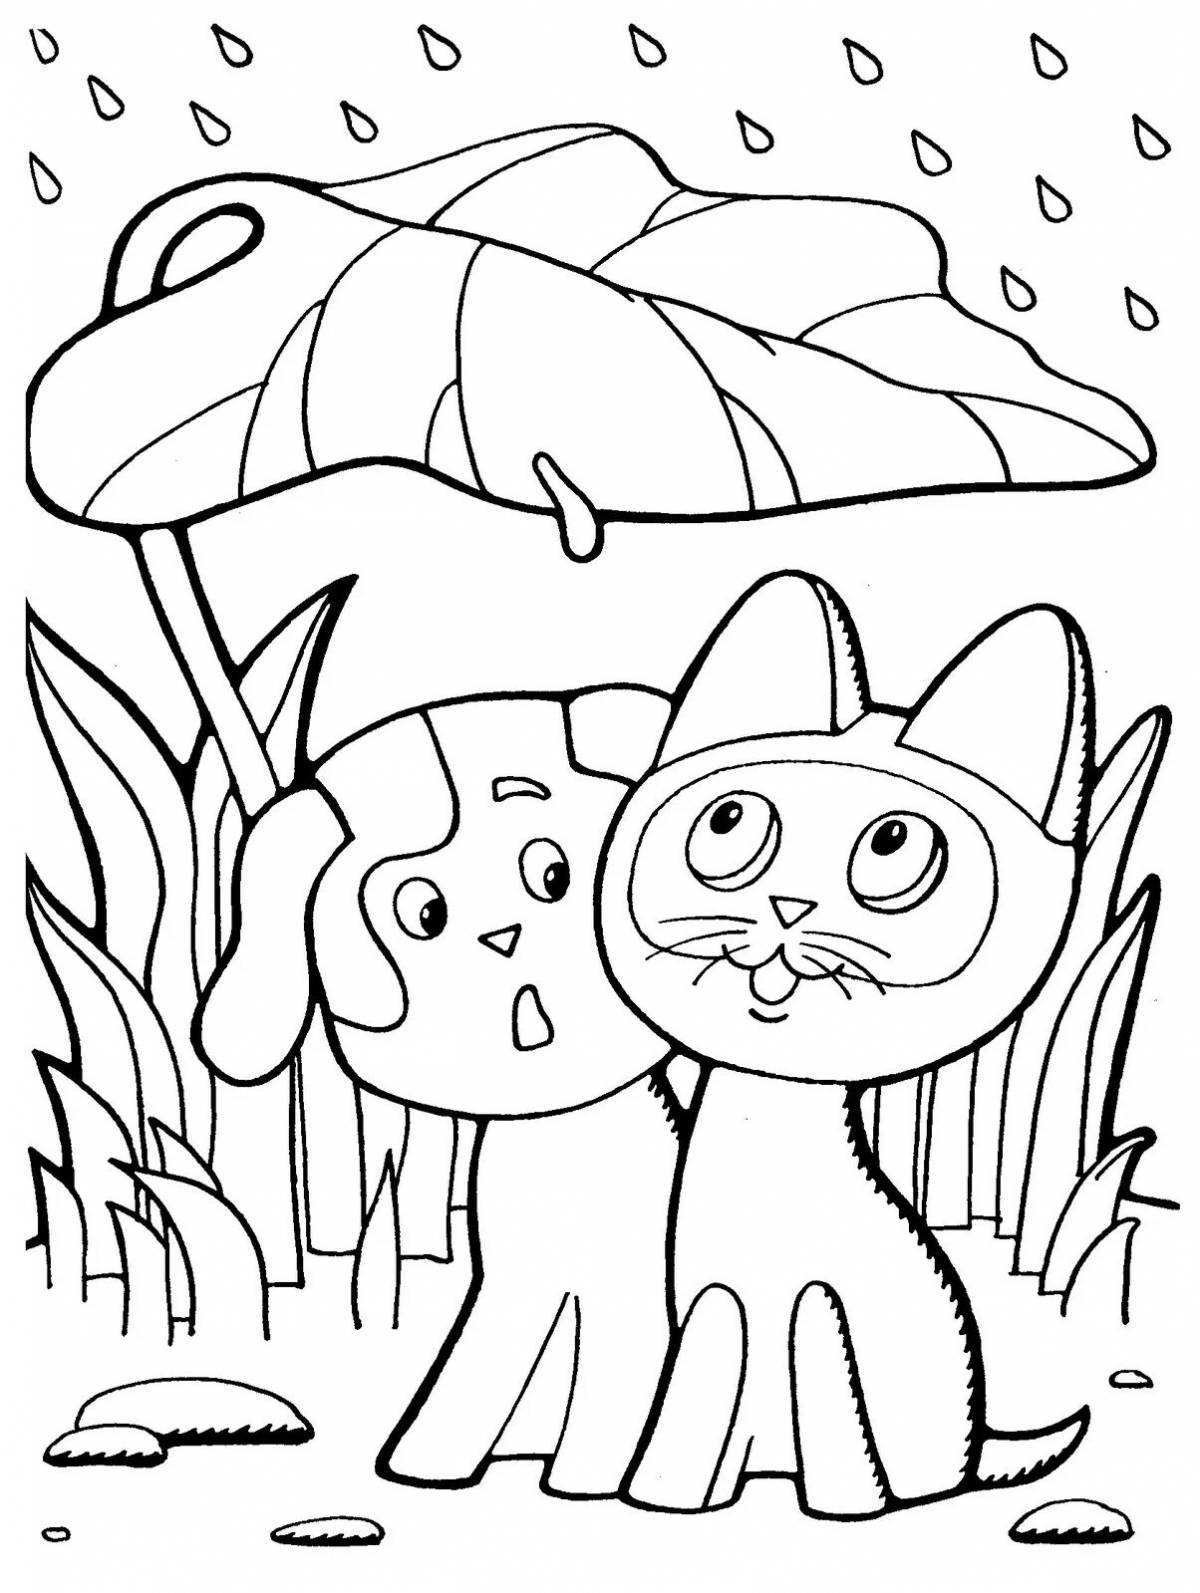 Kitty woof coloring book for kids